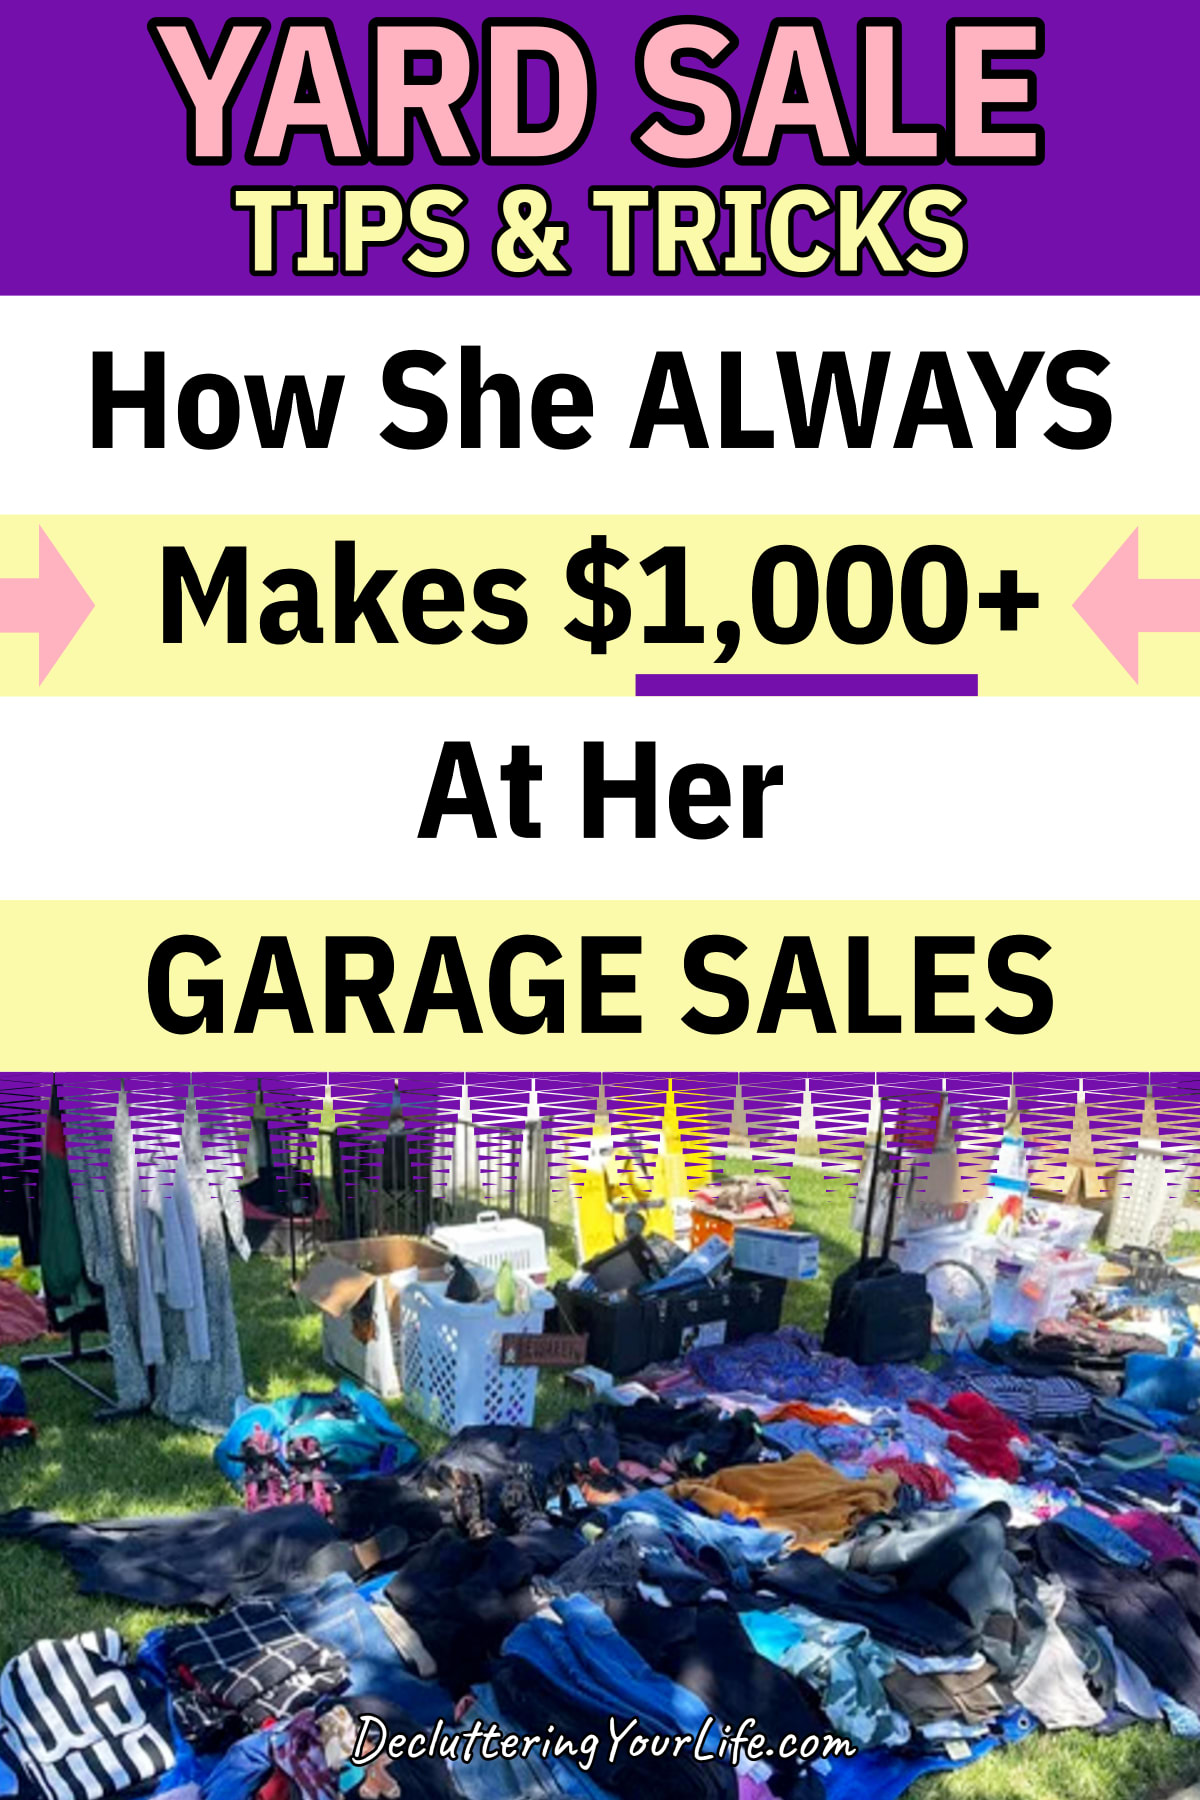 How She ALWAYS Makes $1,000+ Selling Clutter At Yard Sales